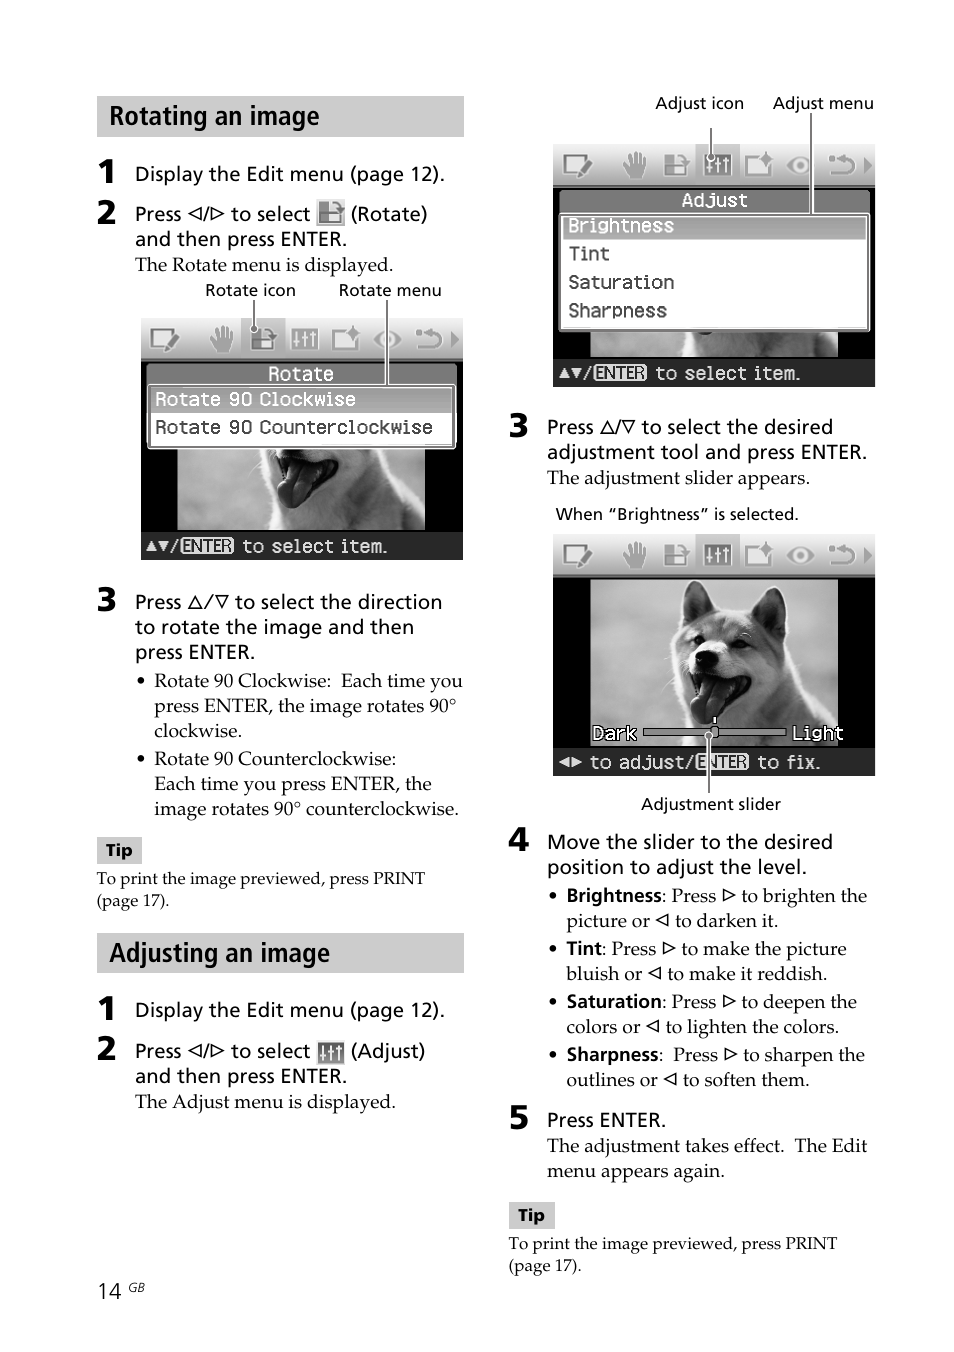 Rotating an image, Adjusting an image | Sony DPP-FP70 User Manual | Page 14 / 84